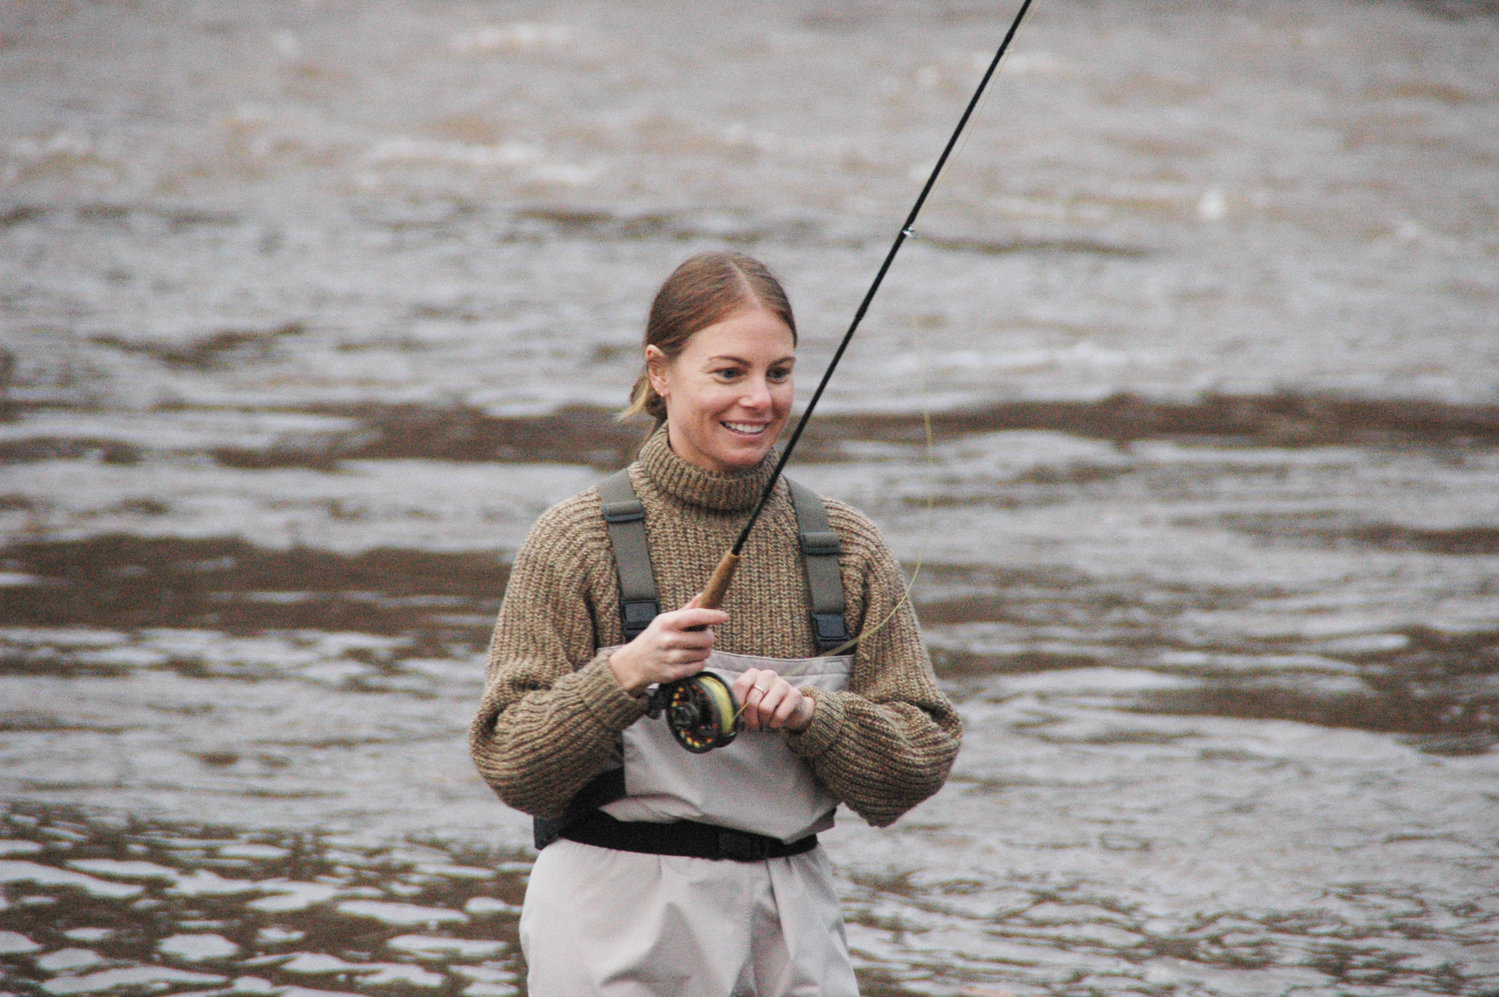 Rachael Yaeger is all smiles as she wades back in after the ceremonial First Cast of fishing season. The new owner of the Roscoe Motel was cheered on by friends, family and members of the community on Friday Morning.